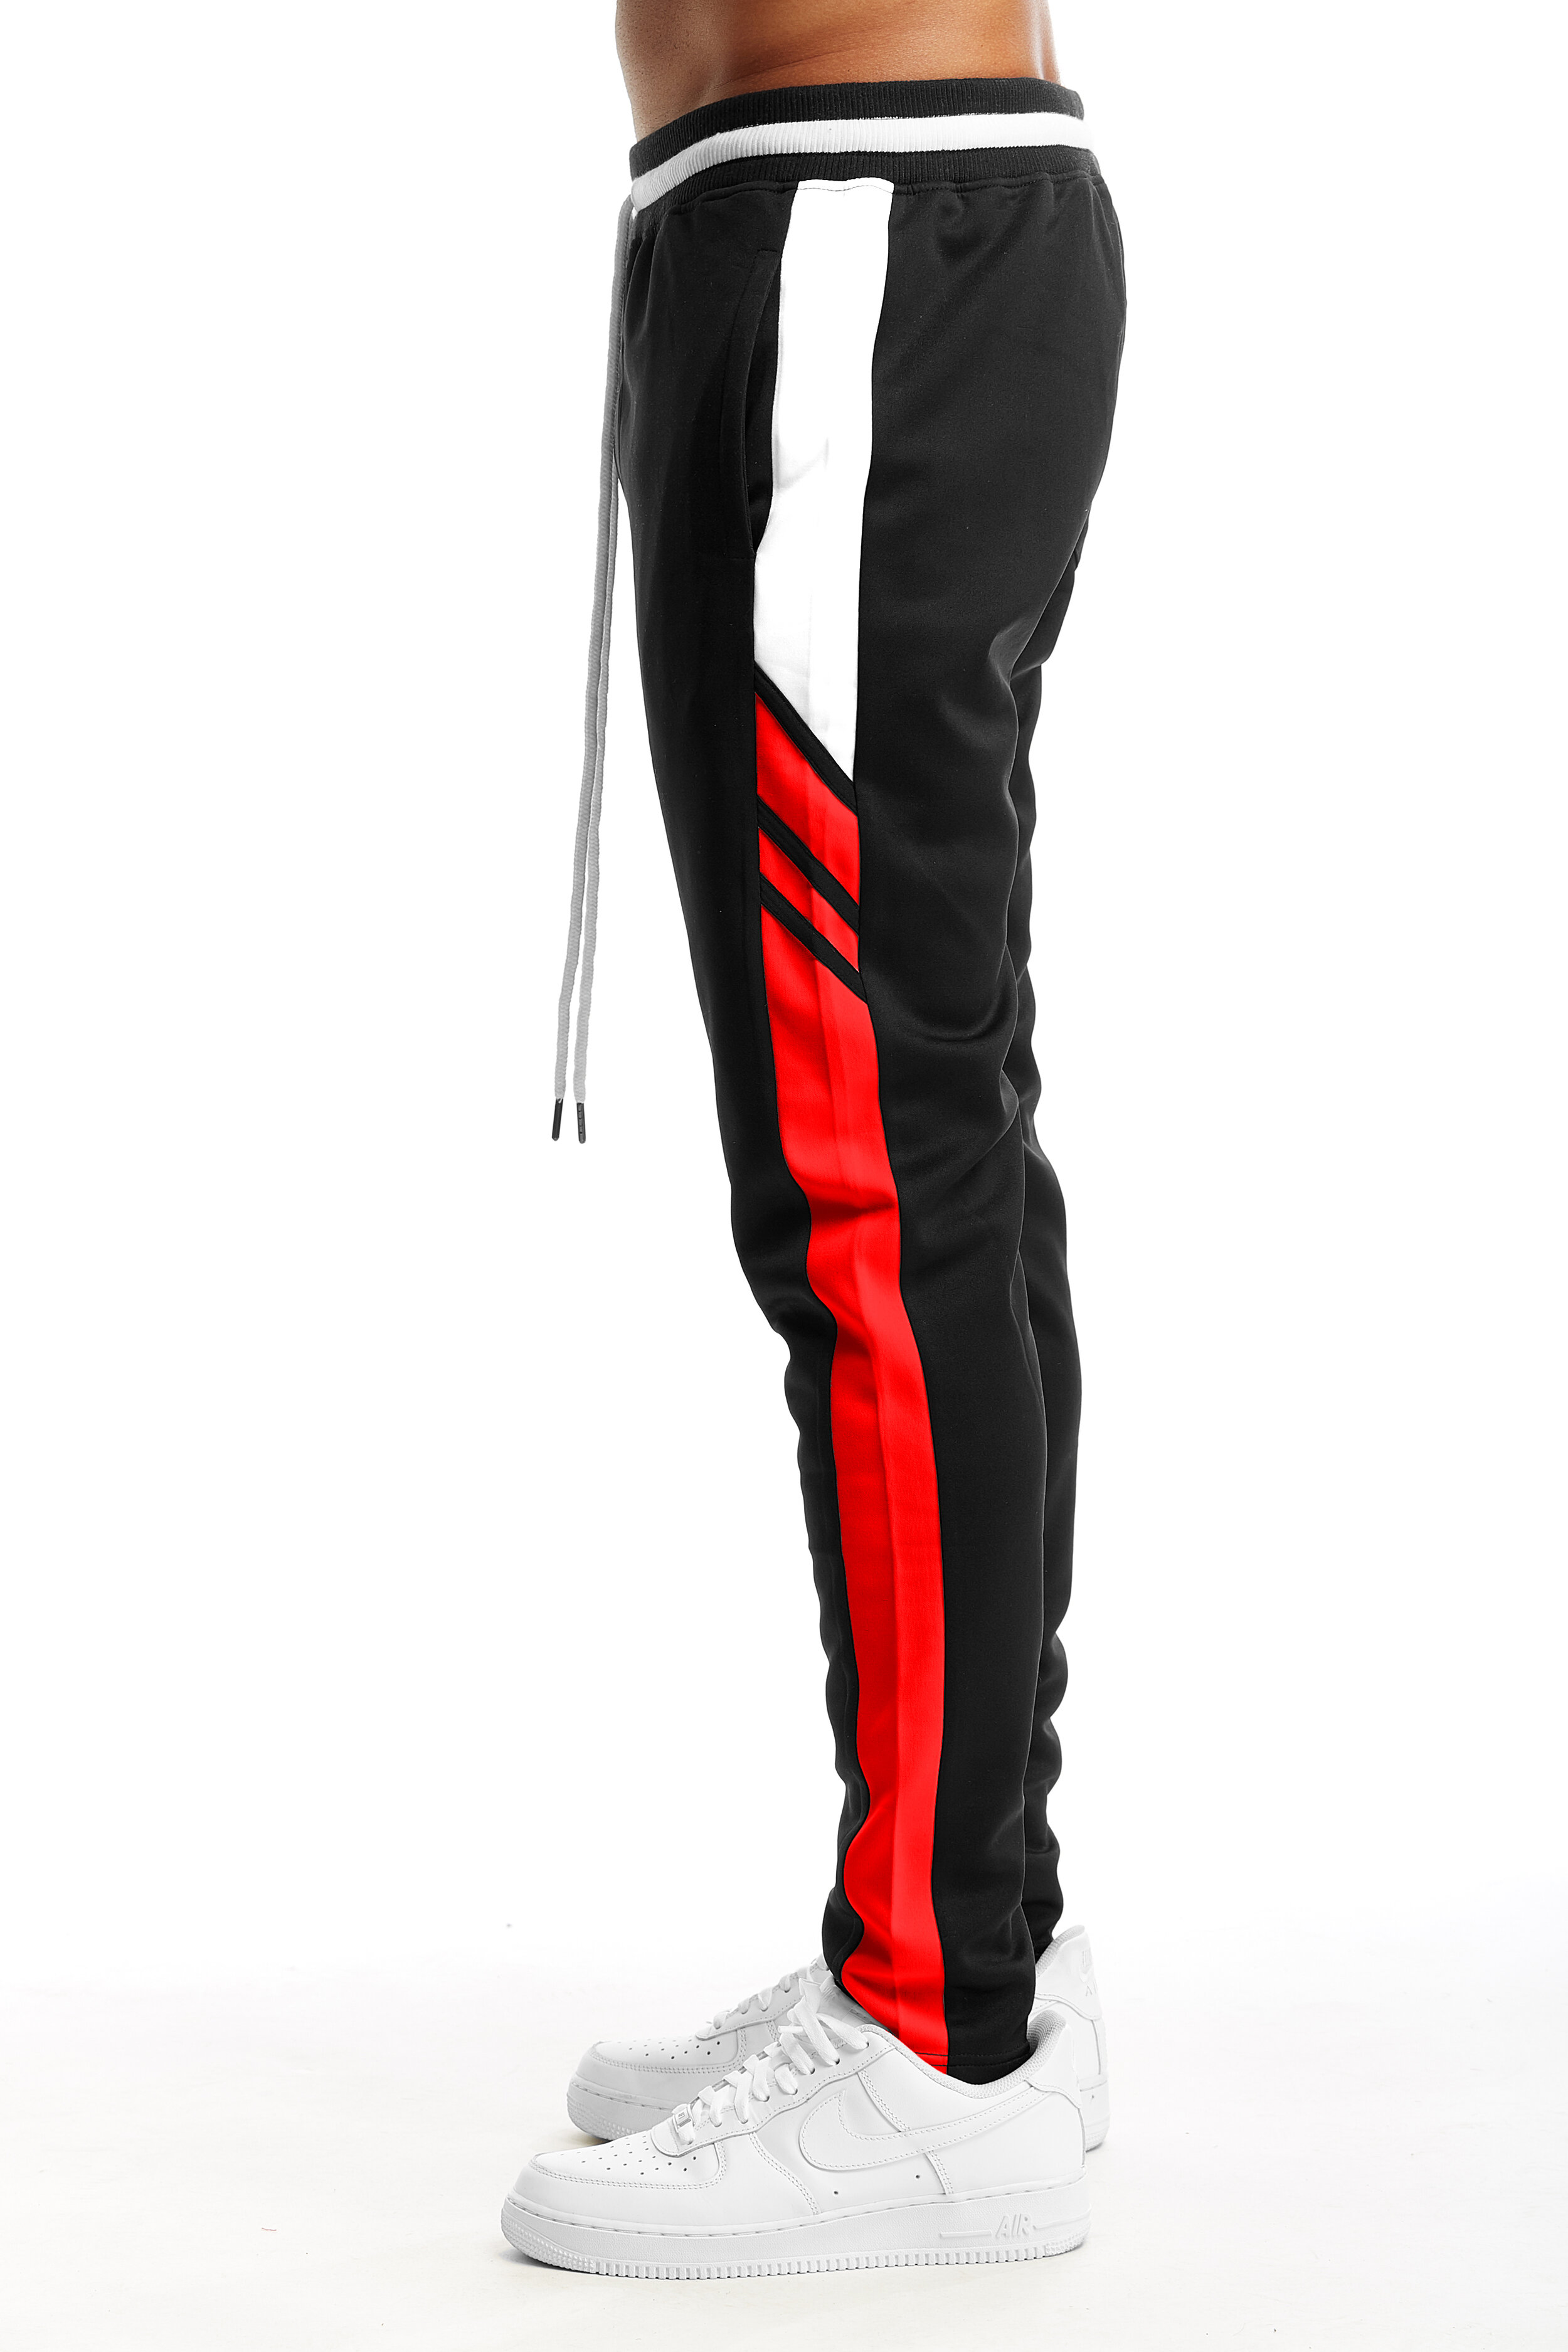 BLEECKER and MERCER BP0591 SLIM FIT TRACK PANTS with DIAGONAL SIDE 